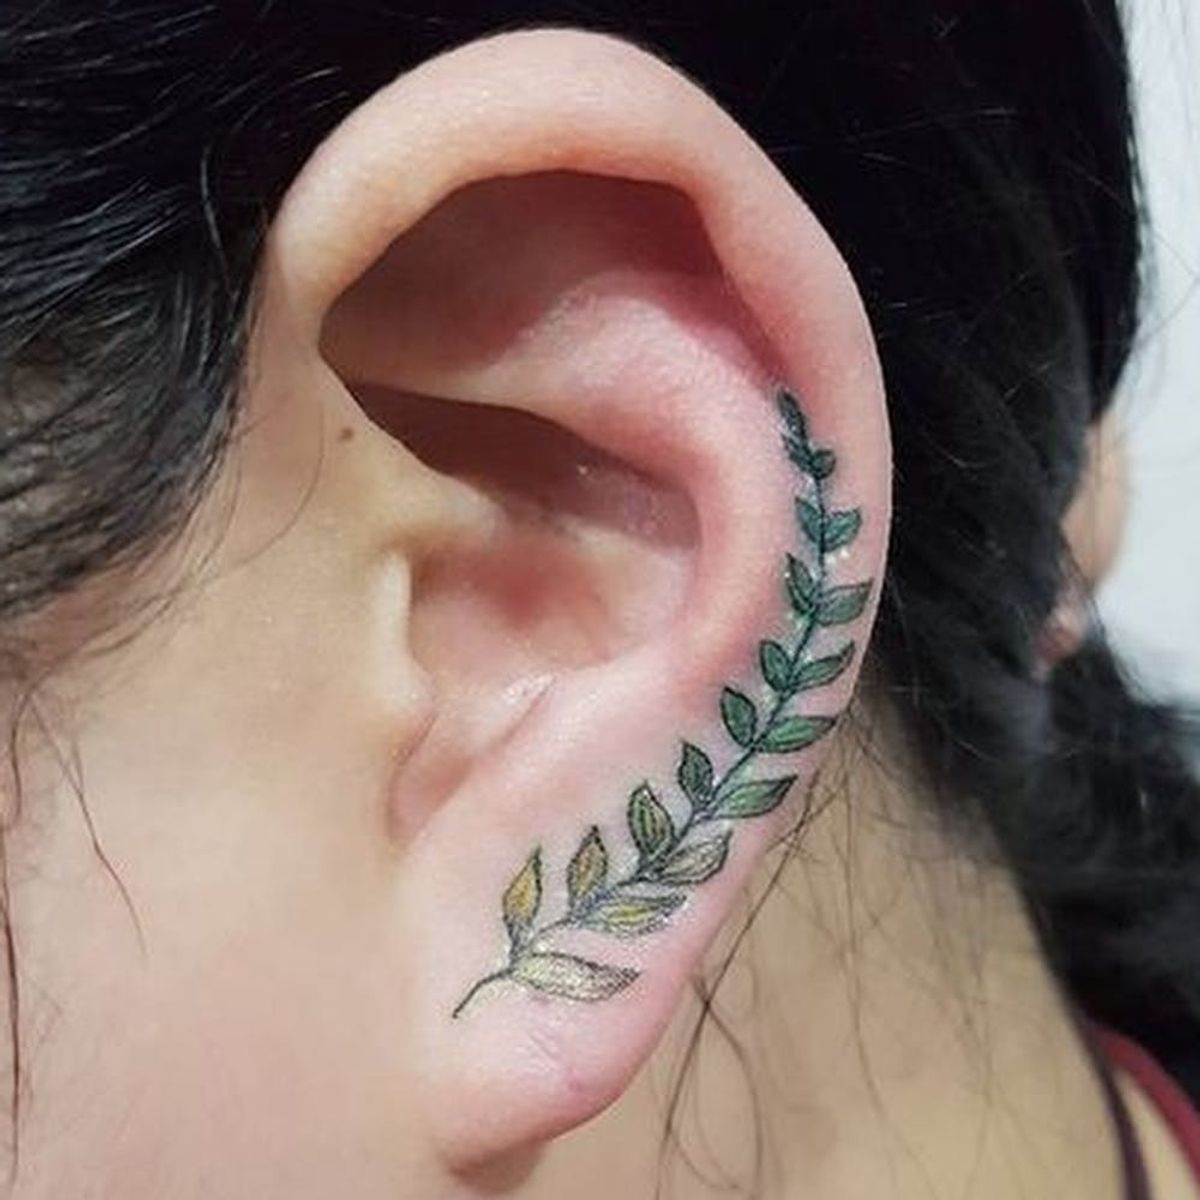 7 Floral Ear Tattoos That Are Beyond Adorable